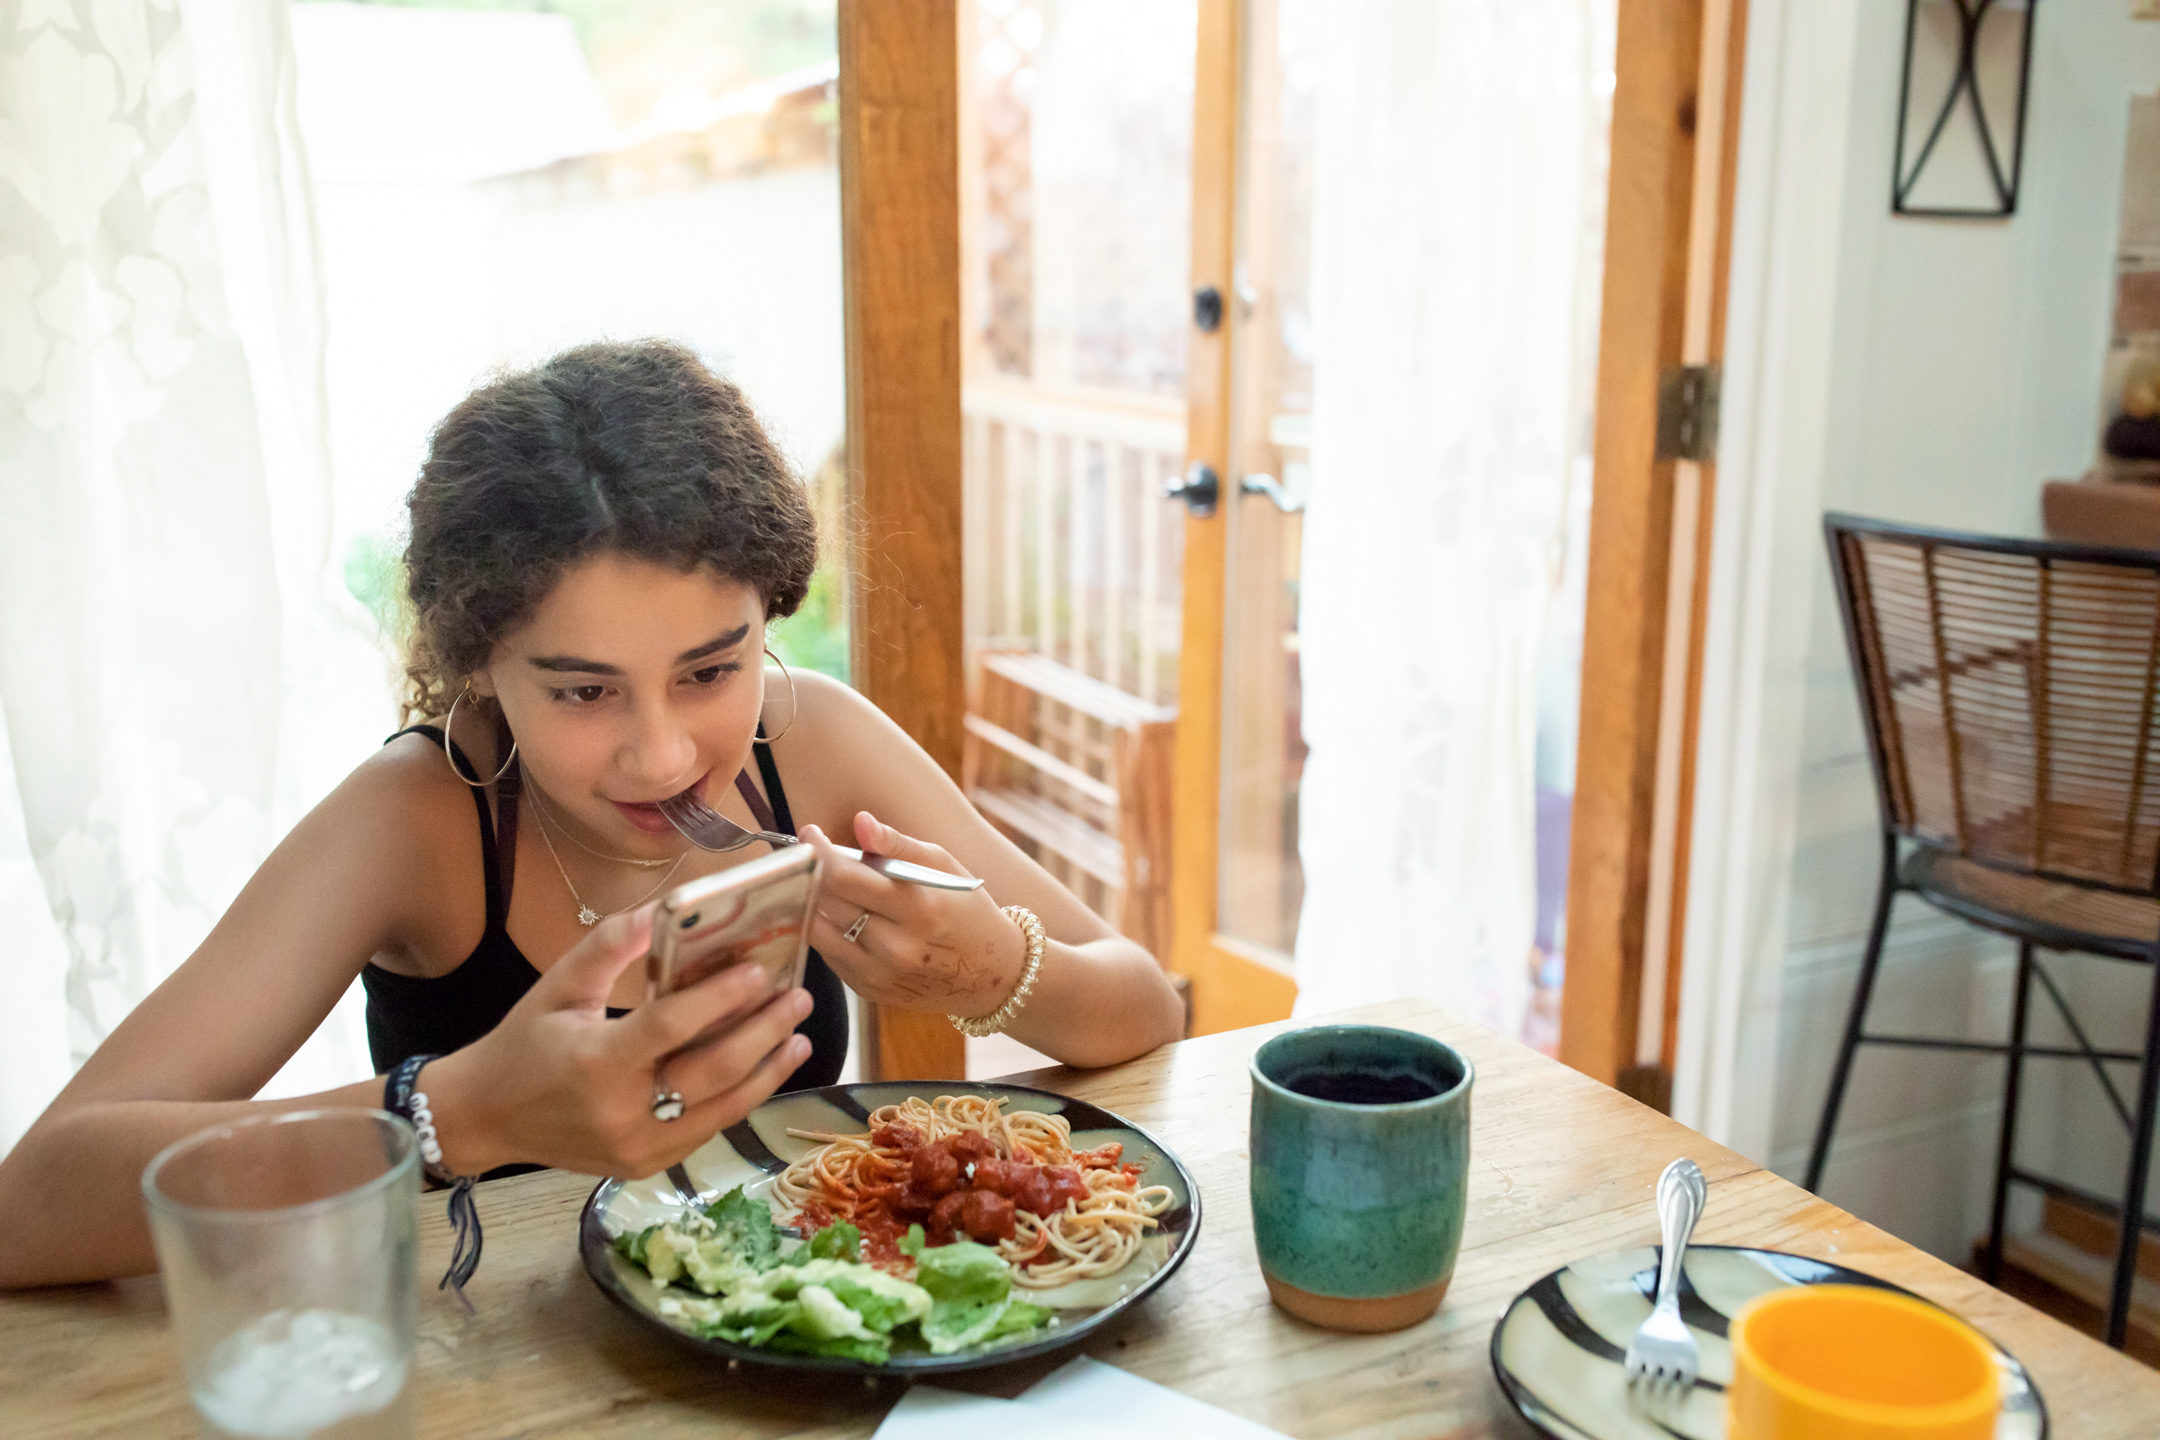 A teen girl eats alone at a table while looking at her phone